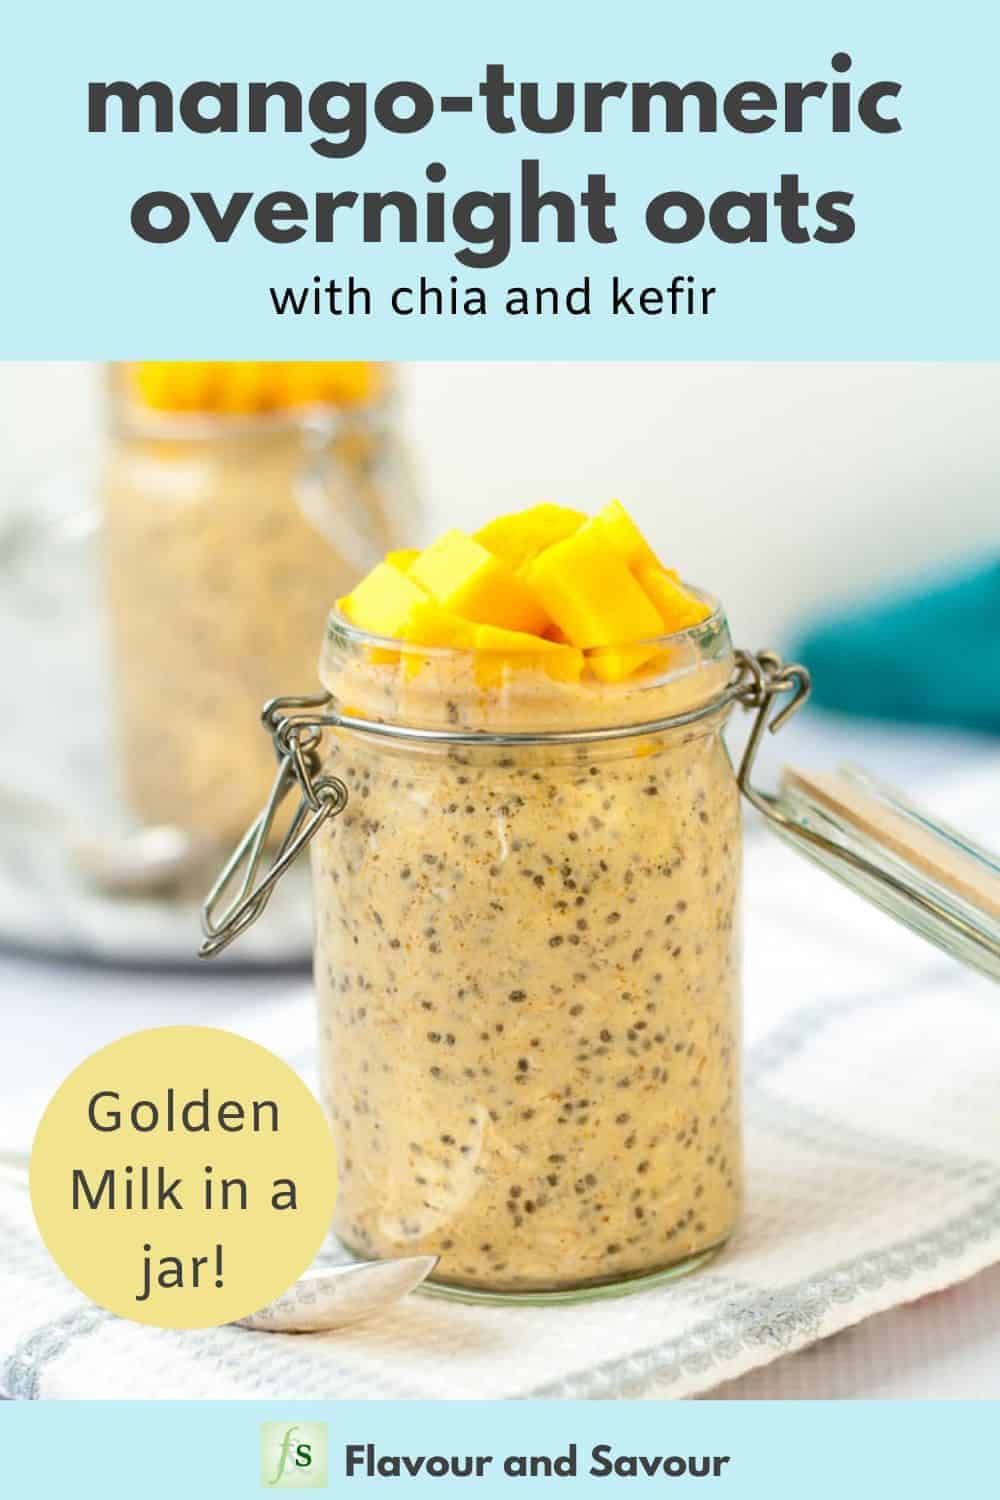 Mango Turmeric Overnight Oats with Kefir - Flavour and Savour